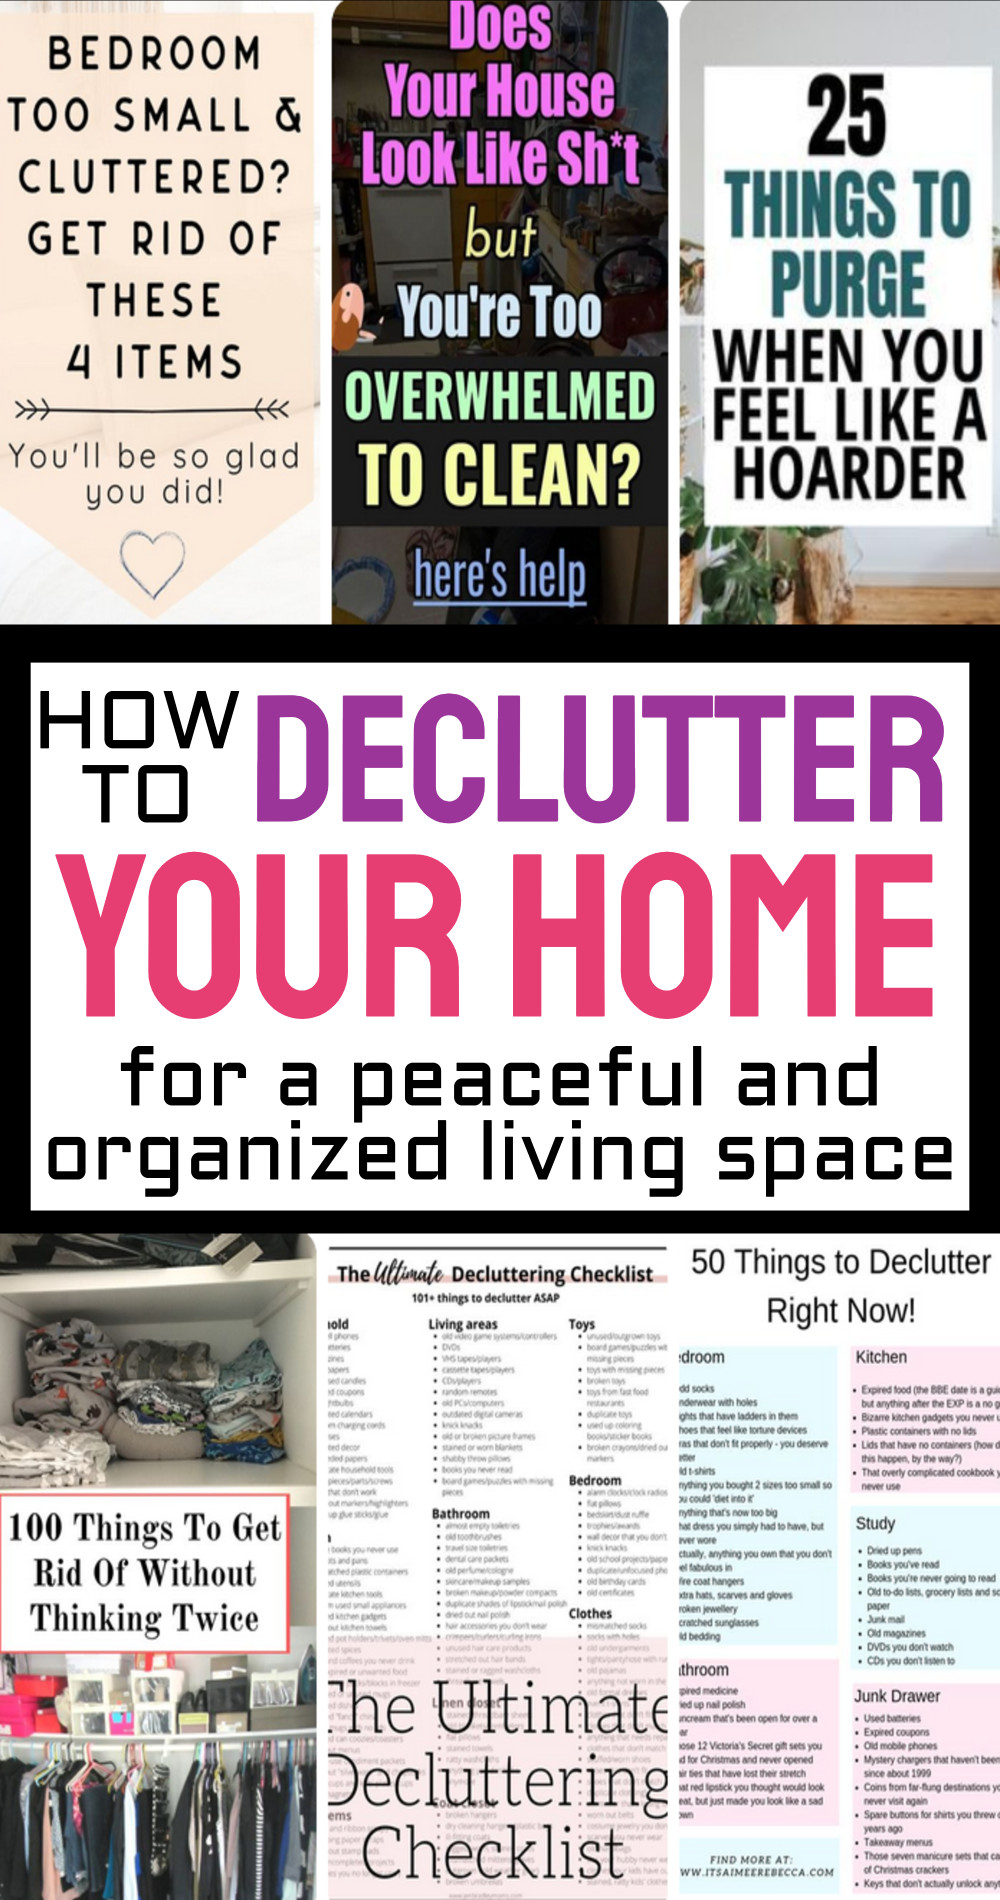 How to declutter your home for a peaceful and organized living space